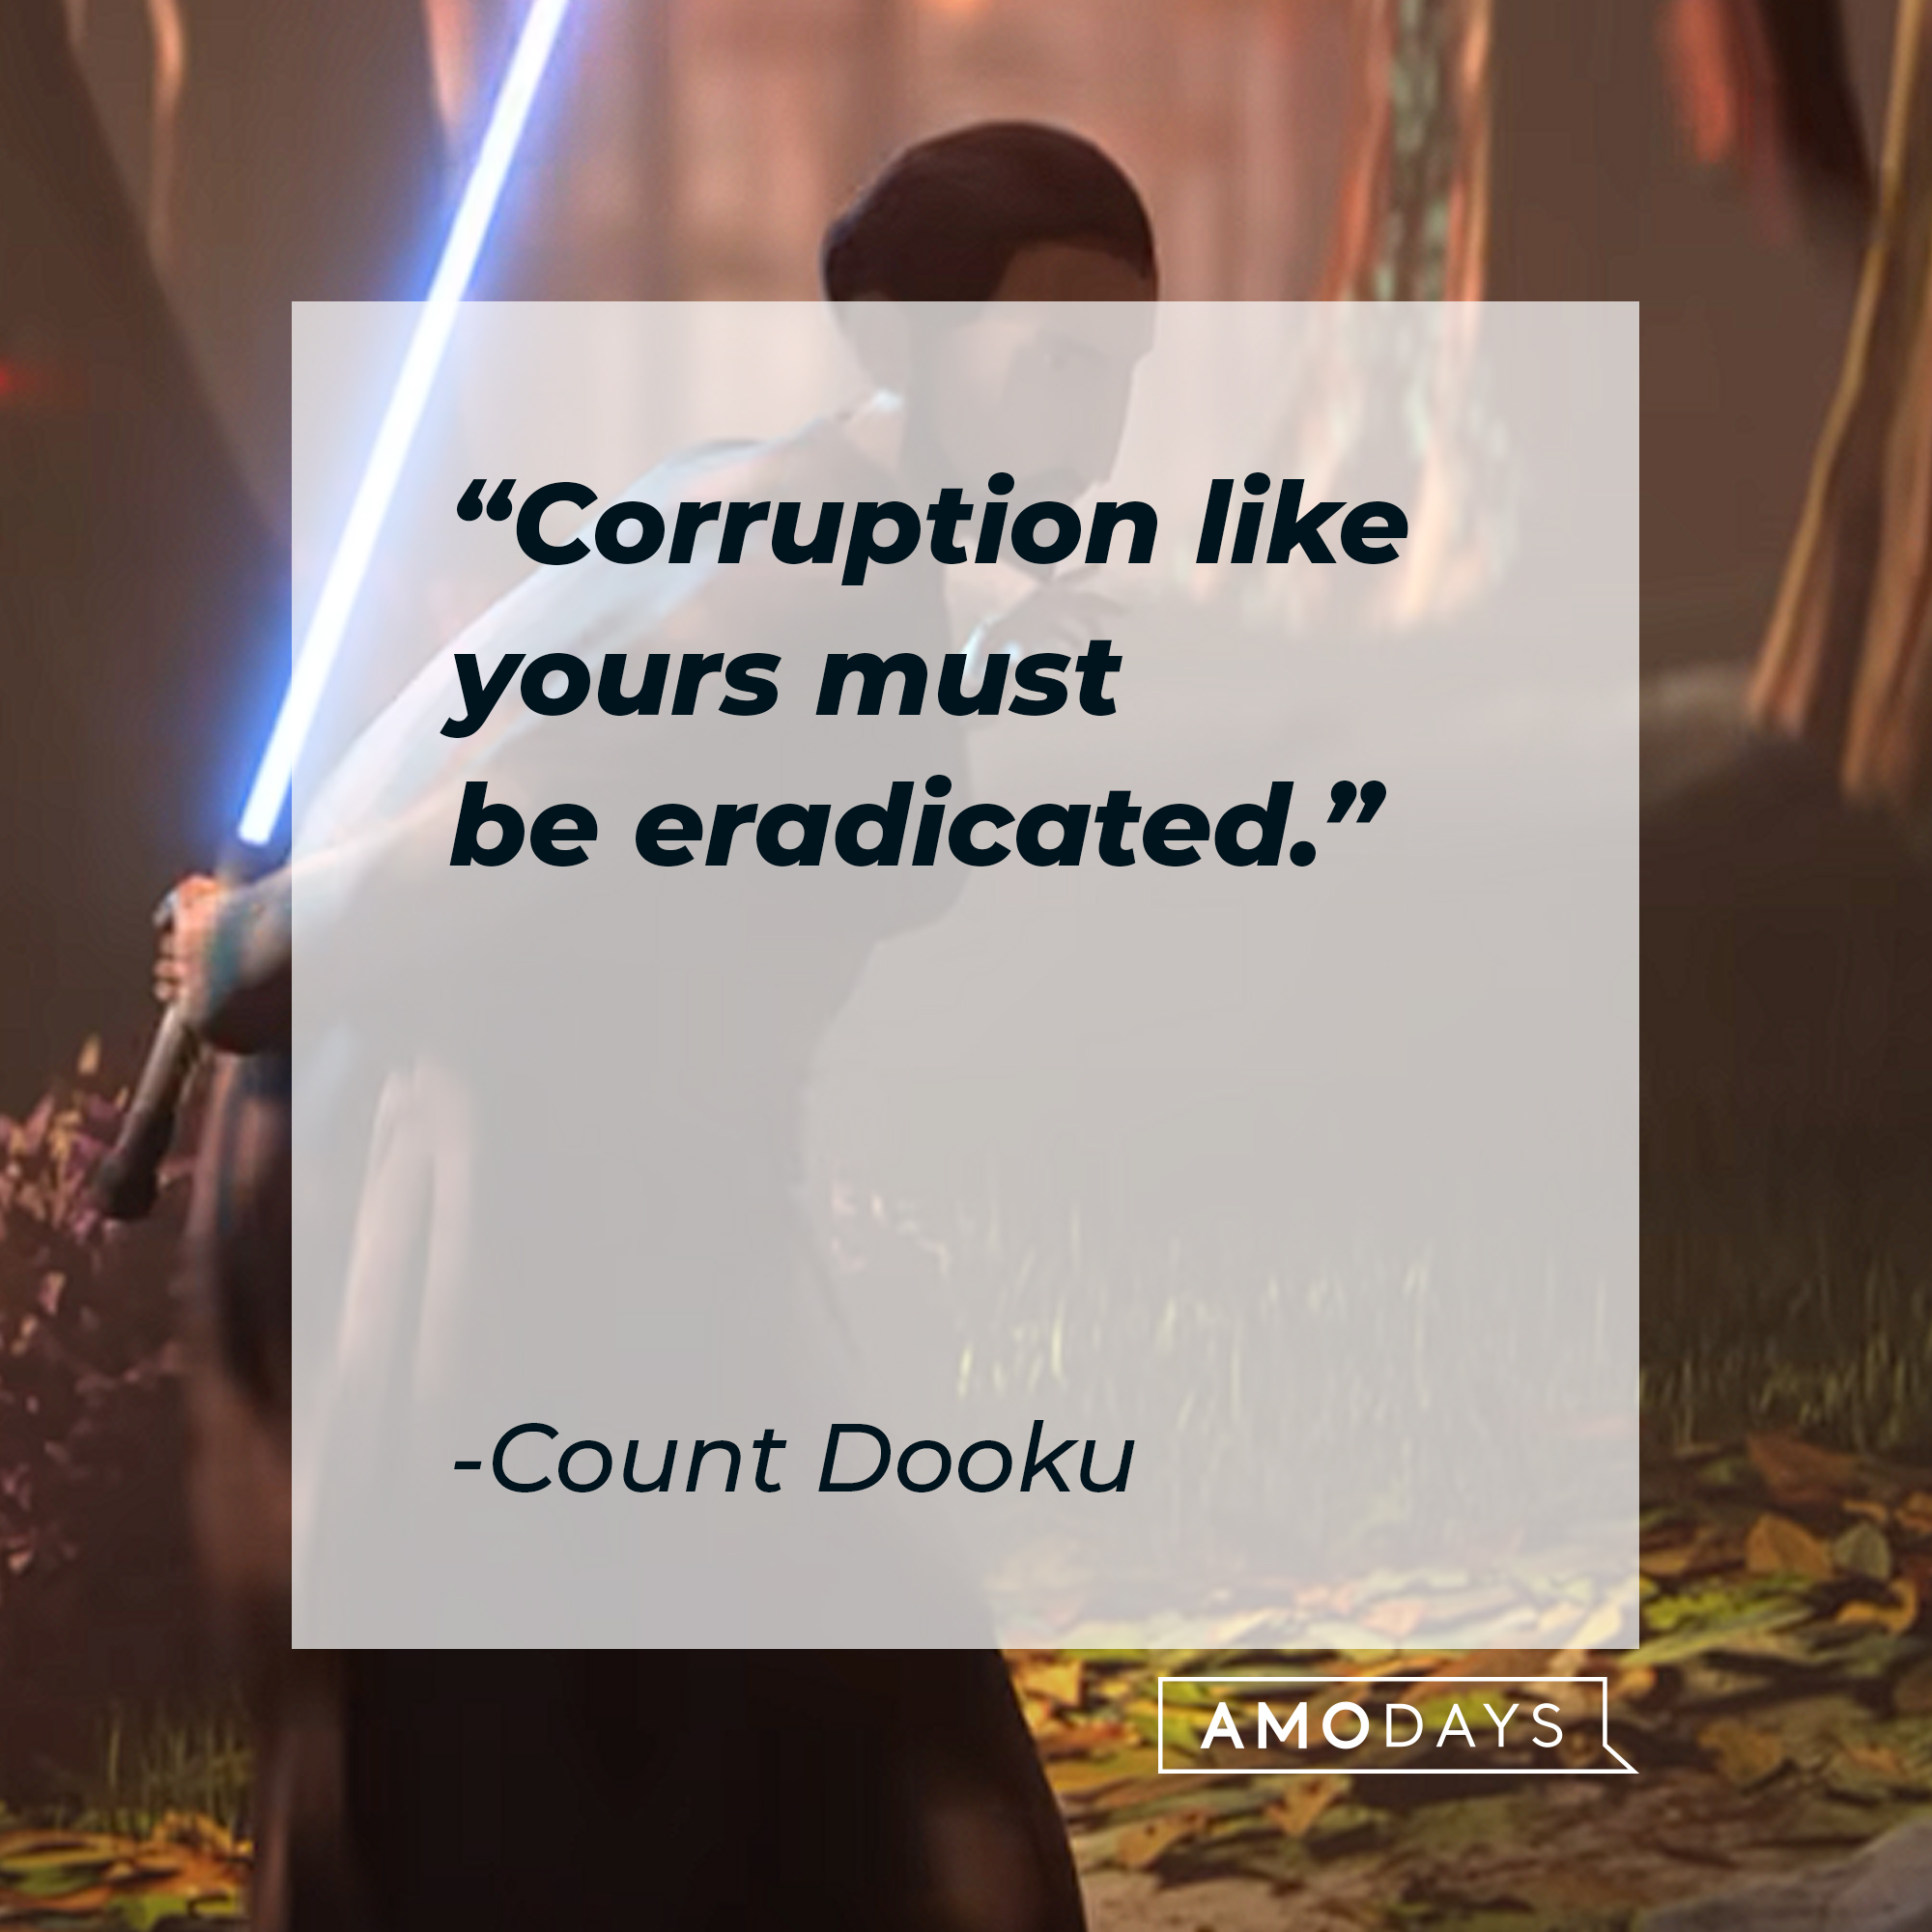 Count Dooku's quote: "Corruption like yours must be eradicated." | Source: youtube.com/StarWars